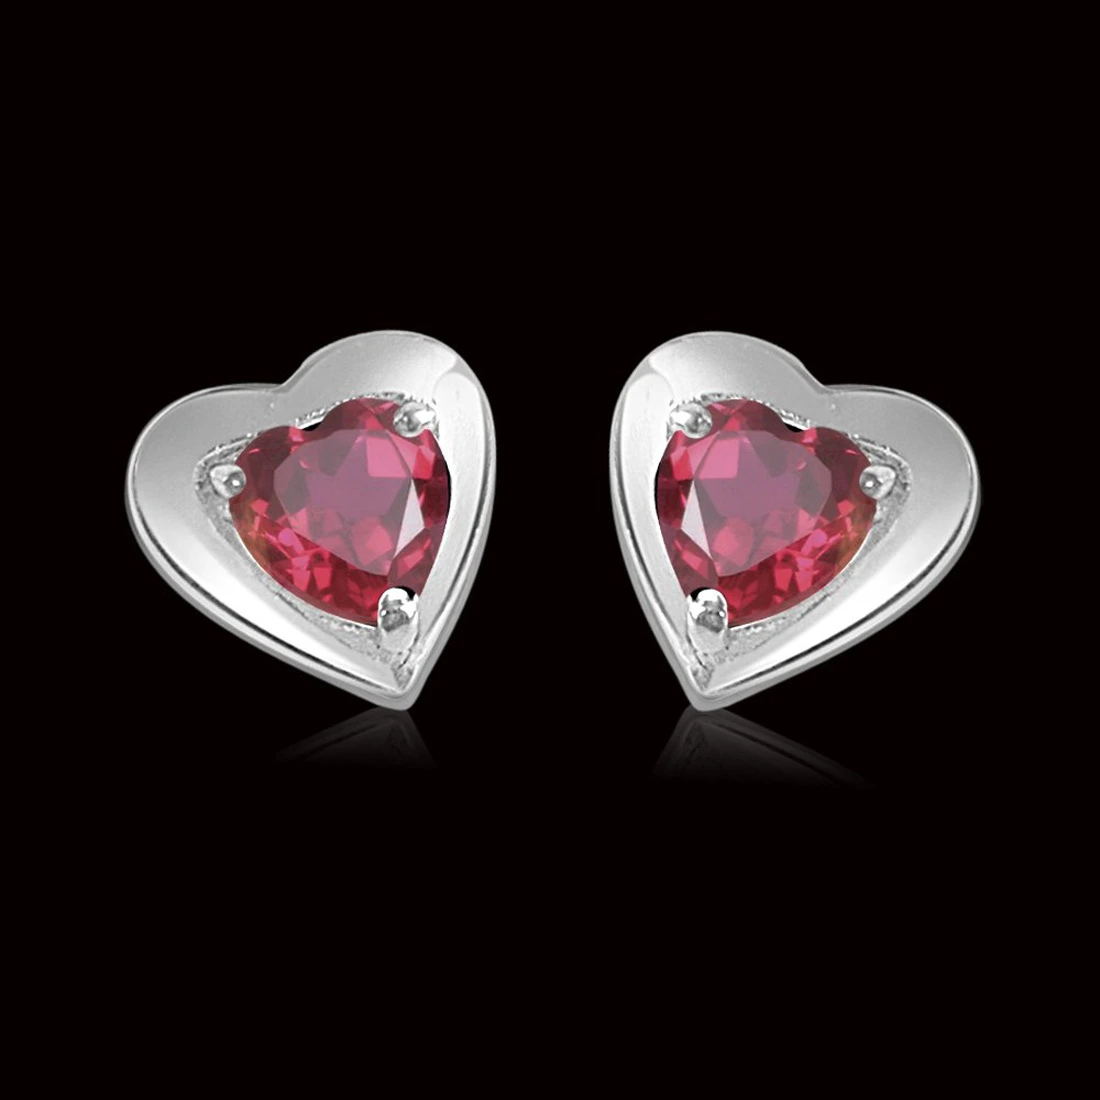 Heart Shape Red Garnet Pendant & Earring Set with Silver finished Chain for Girls (SDS115)